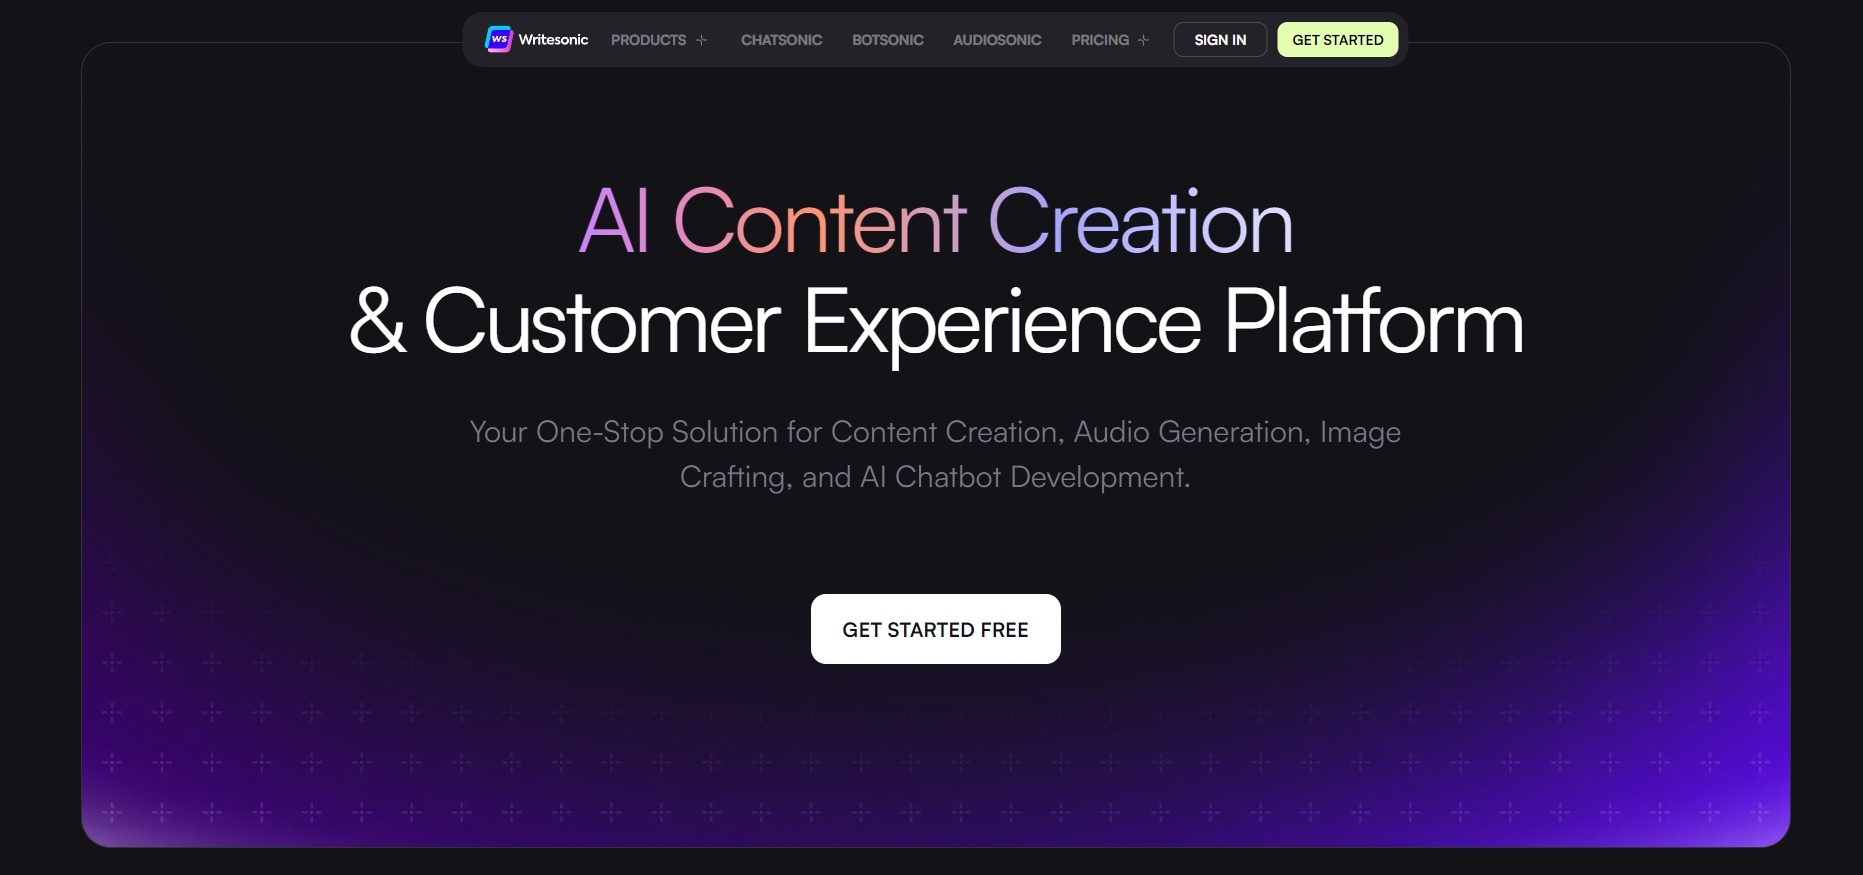 Writesonic AI content creation with CRM Tool in generating wide range of content